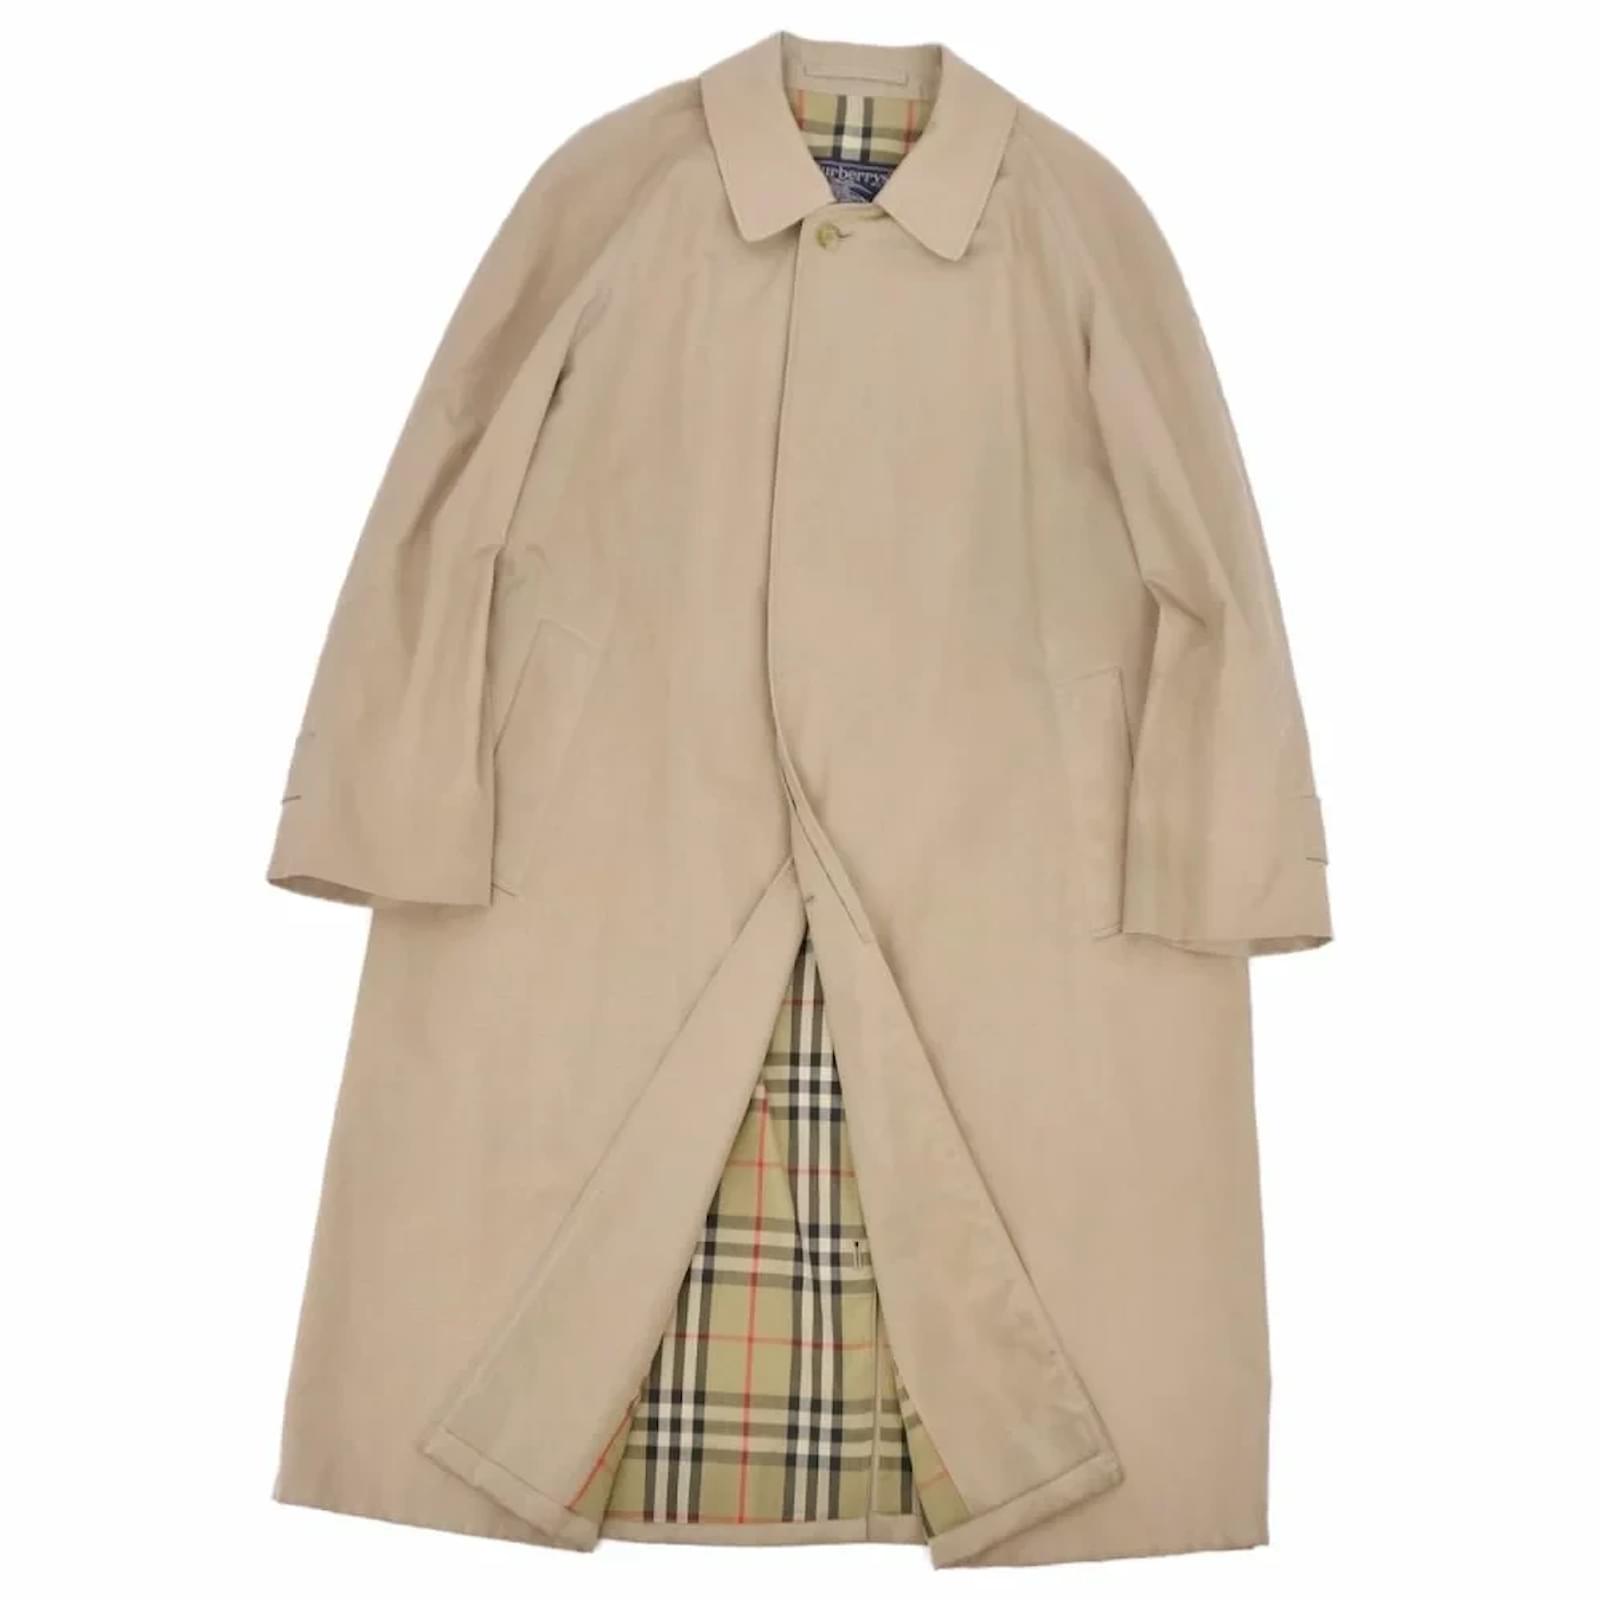 Used] Vintage Burberry Burberrys Made in England Balmacaan Coat Beige  Cotton Polyester  - Joli Closet